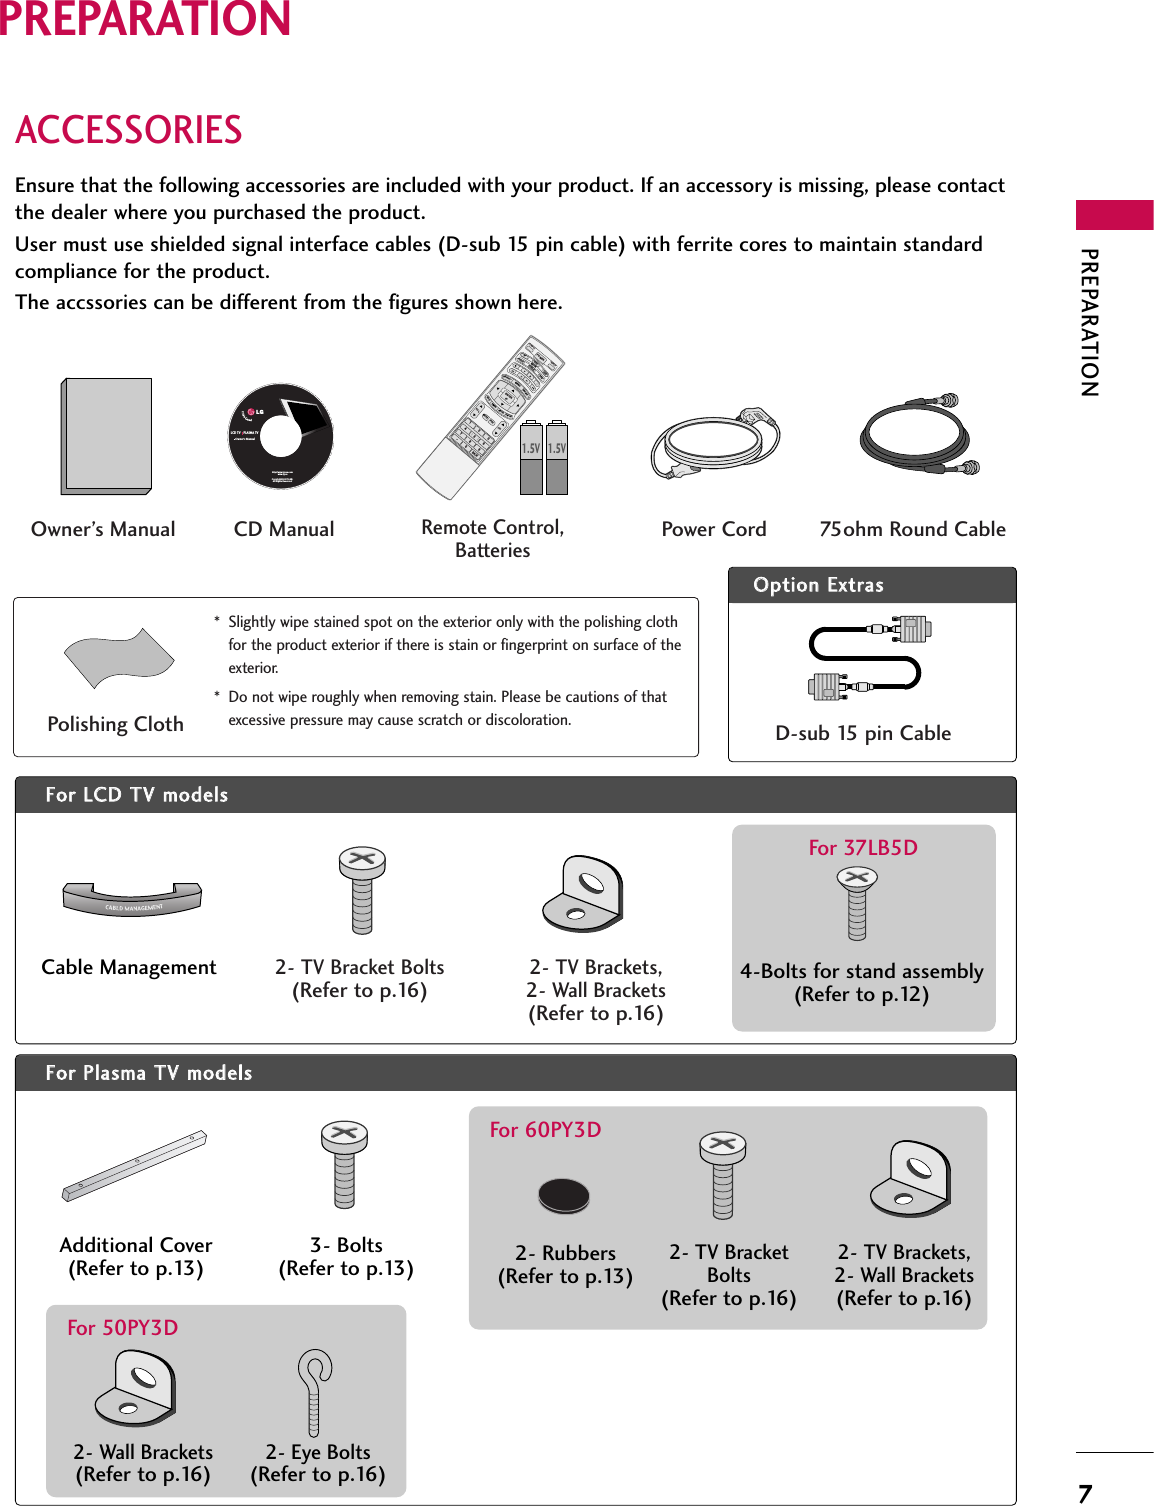 PREPARATION7PREPARATIONACCESSORIESEnsure that the following accessories are included with your product. If an accessory is missing, please contactthe dealer where you purchased the product. User must use shielded signal interface cables (D-sub 15 pin cable) with ferrite cores to maintain standardcompliance for the product.The accssories can be different from the figures shown here.OOppttiioonn EExxttrraassFFoorr LLCCDD TTVV mmooddeellssCable Management 4-Bolts for stand assembly(Refer to p.12)For 37LB5DFFoorr PPllaassmmaa TTVV mmooddeellssAdditional Cover(Refer to p.13)3- Bolts(Refer to p.13)* Slightly wipe stained spot on the exterior only with the polishing clothfor the product exterior if there is stain or fingerprint on surface of theexterior.* Do not wipe roughly when removing stain. Please be cautions of thatexcessive pressure may cause scratch or discoloration.Polishing ClothLCD TV    PLASMA TVOwner&apos;s Manualhttp://www.lgusa.comwww.lg.caCopyright© 2007 LGE,All Rights Reserved.D-sub 15 pin Cable1.5V 1.5VOwner’s Manual Power Cord 75ohm Round CableRemote Control,Batteries1 2 3     456    7809   BACKVOLCHMUTEFAVBRIGHT -MENUBRIGHT +ENTEREXITTIMERRATIOSIMPLINKPOWERVCRTVDVDAUDIOCABLESTBMODETV INPUTINPUT CHFAVMENUBRIGHT +ENTERTTIMERRATIOSIMPLINK1VOLMUTEEXITCD Manual2- TV Bracket Bolts(Refer to p.16)2- TV Brackets,2- Wall Brackets(Refer to p.16)2- Rubbers(Refer to p.13)For 60PY3D2- TV BracketBolts(Refer to p.16)2- TV Brackets,2- Wall Brackets(Refer to p.16)2- Wall Brackets(Refer to p.16)2- Eye Bolts(Refer to p.16)For 50PY3D